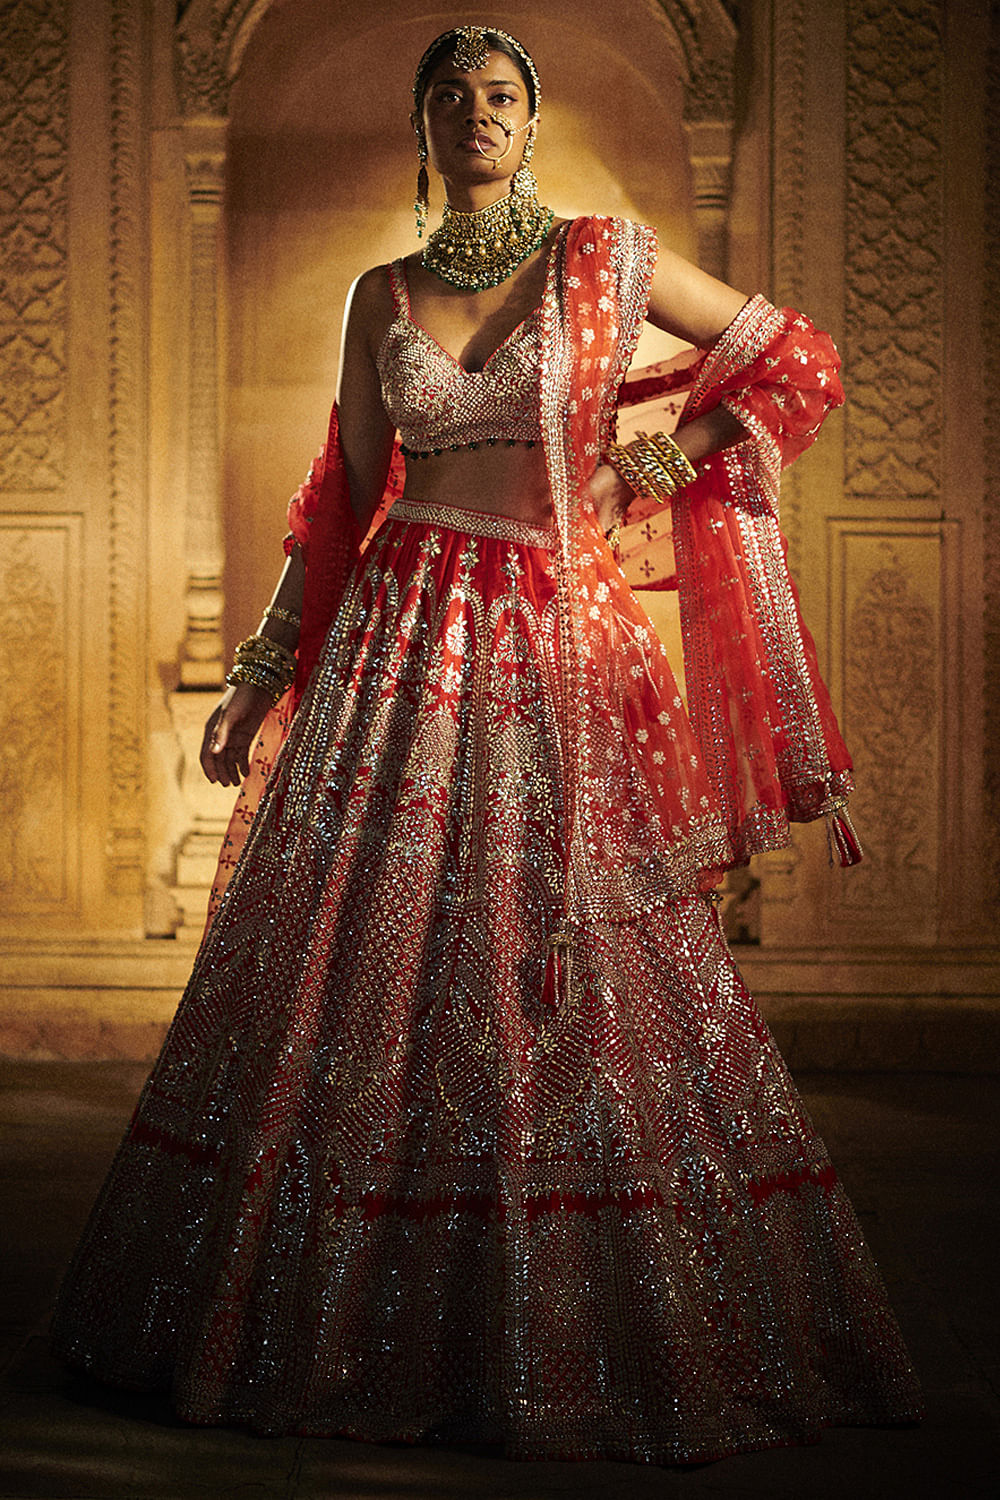 Seema Gujral's new bridal collection “Portraits” is a tribute to Indian  royalty